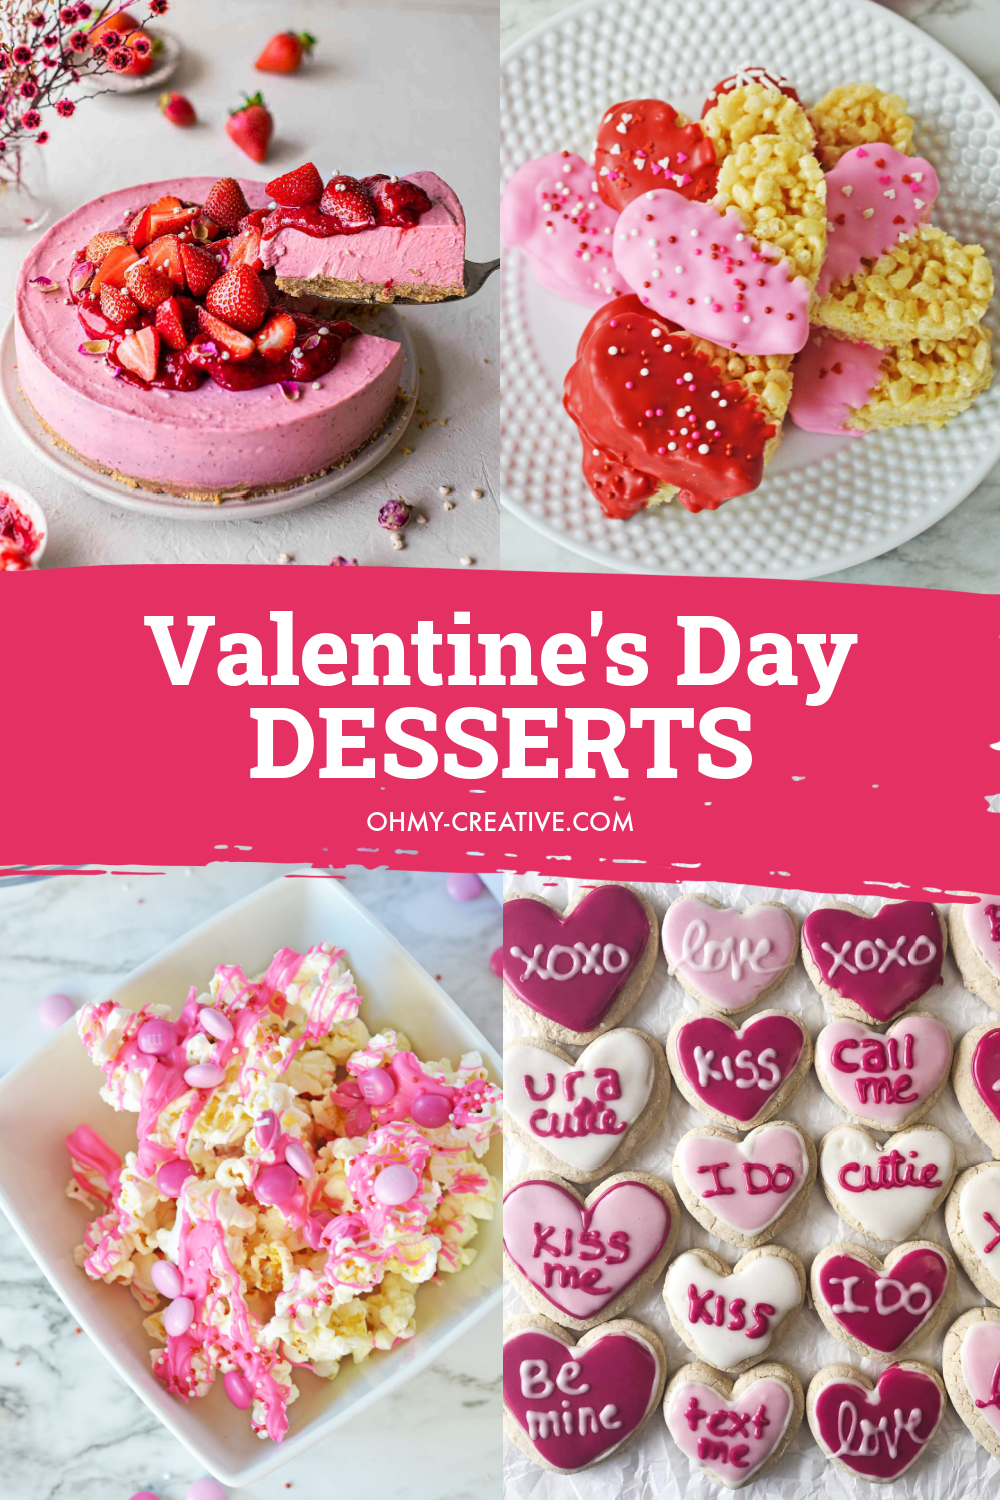 A collage of Valentine's Day desserts including cookies, cakes and pink popcorn.